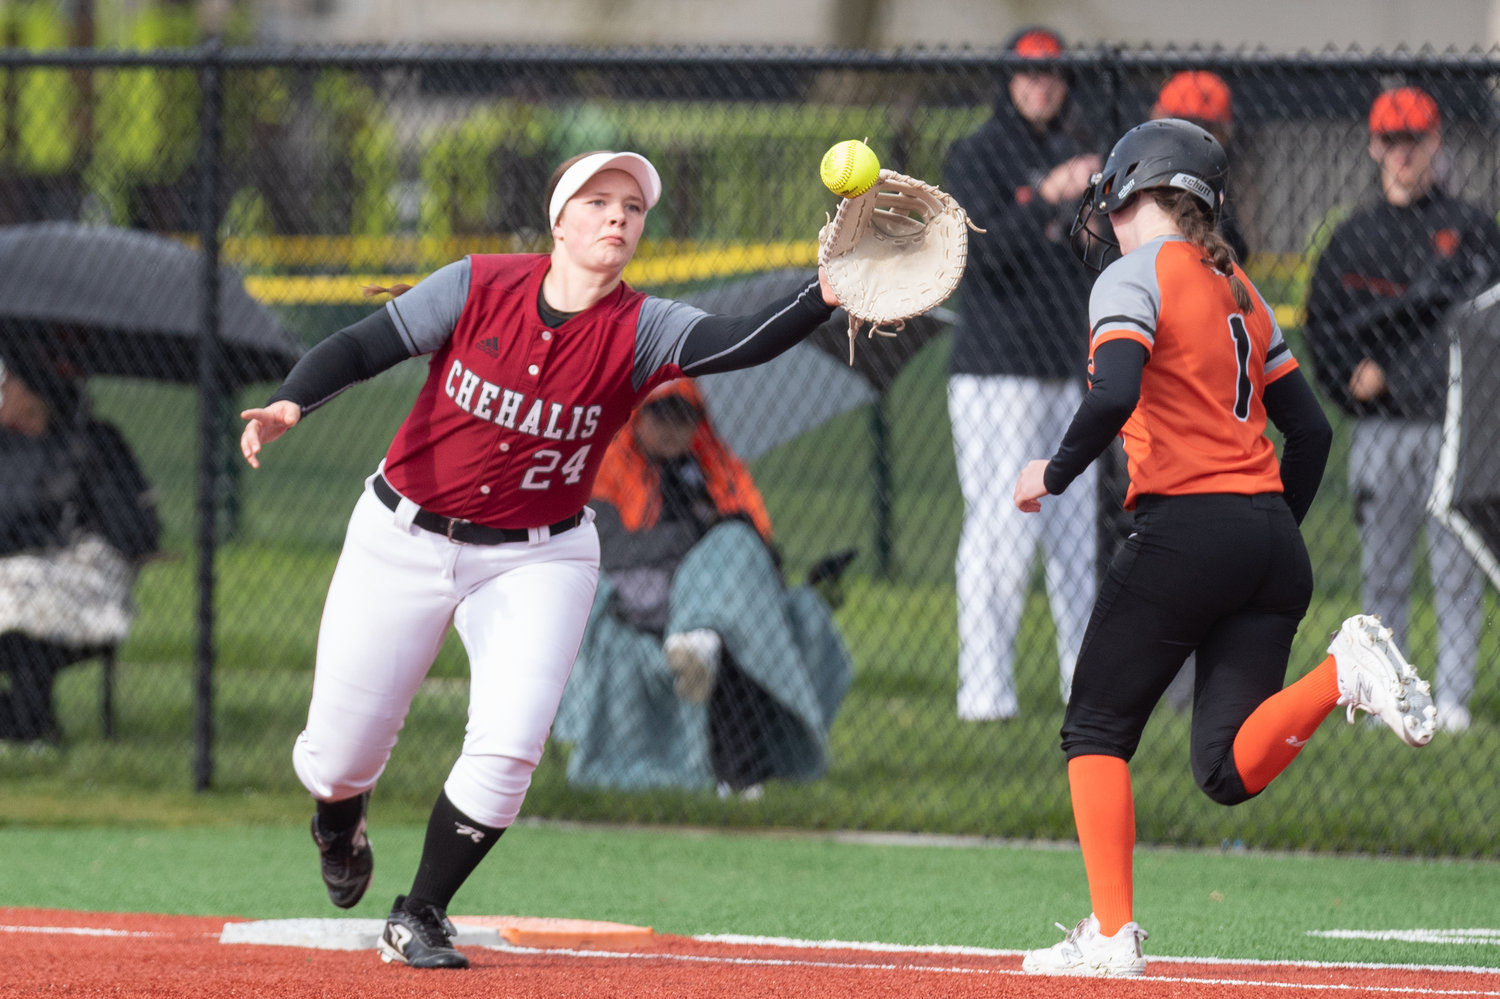 W.F. West's Savannah Hawkins stretches off the base to haul in an errant throw against Centralia April 26 at Recreation Park.